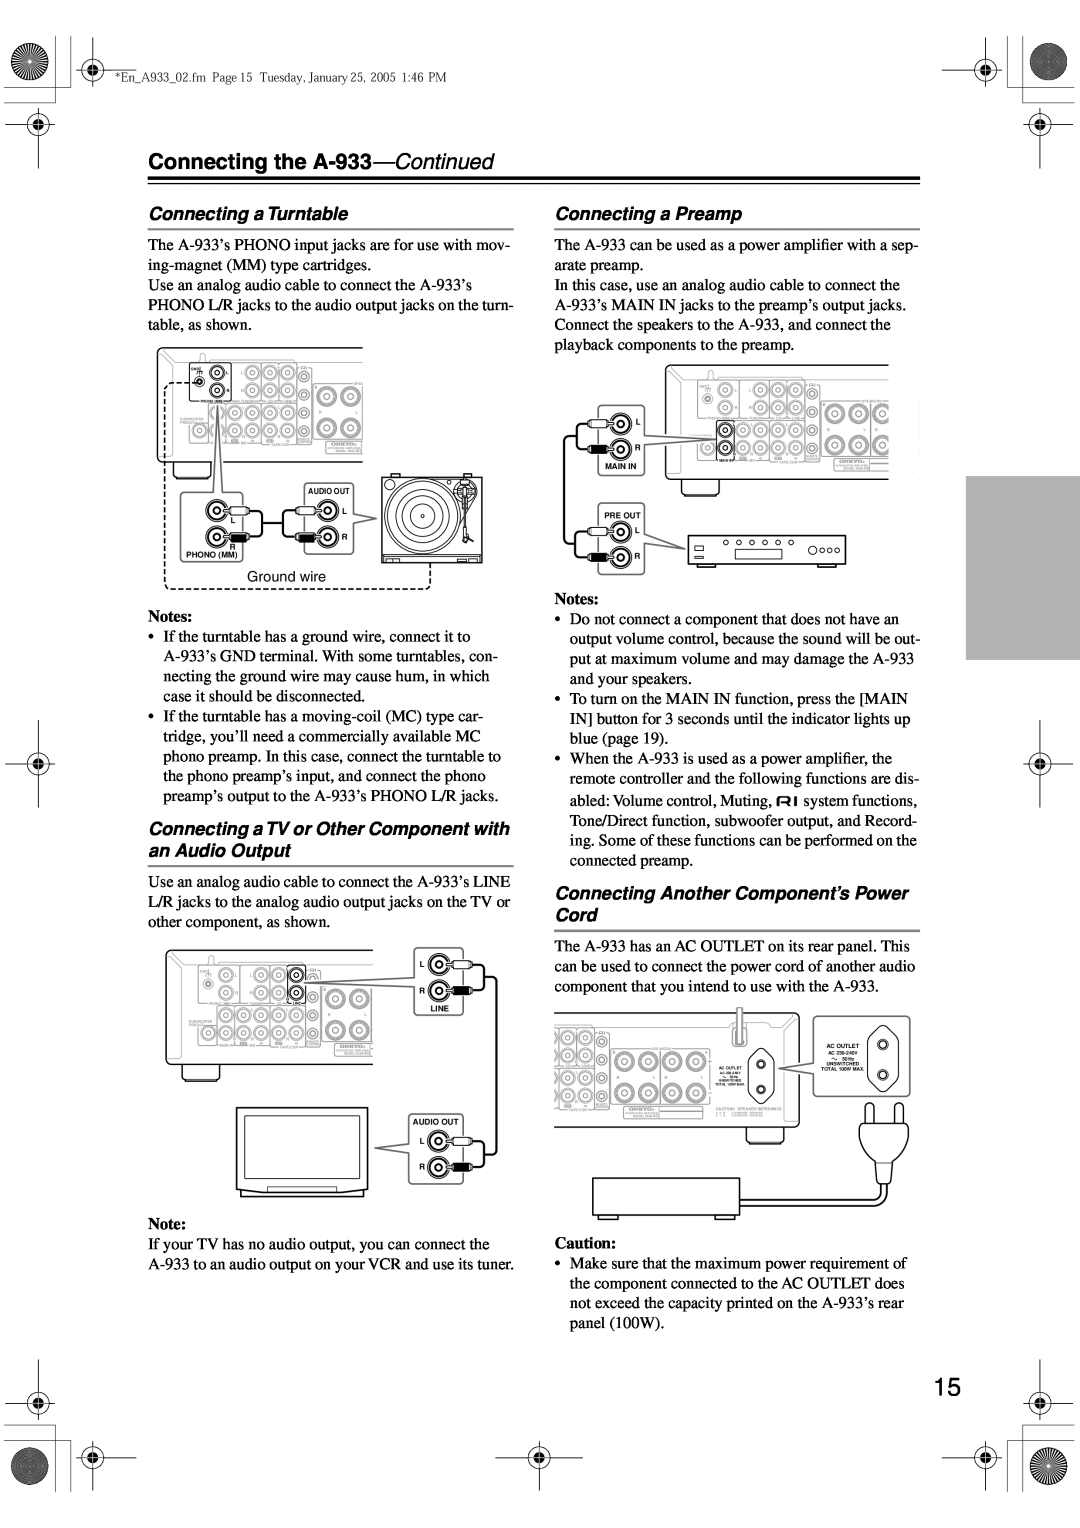 Onkyo A-933 instruction manual Connecting a Turntable, Connecting a Preamp, Connecting Another Component’s Power Cord 